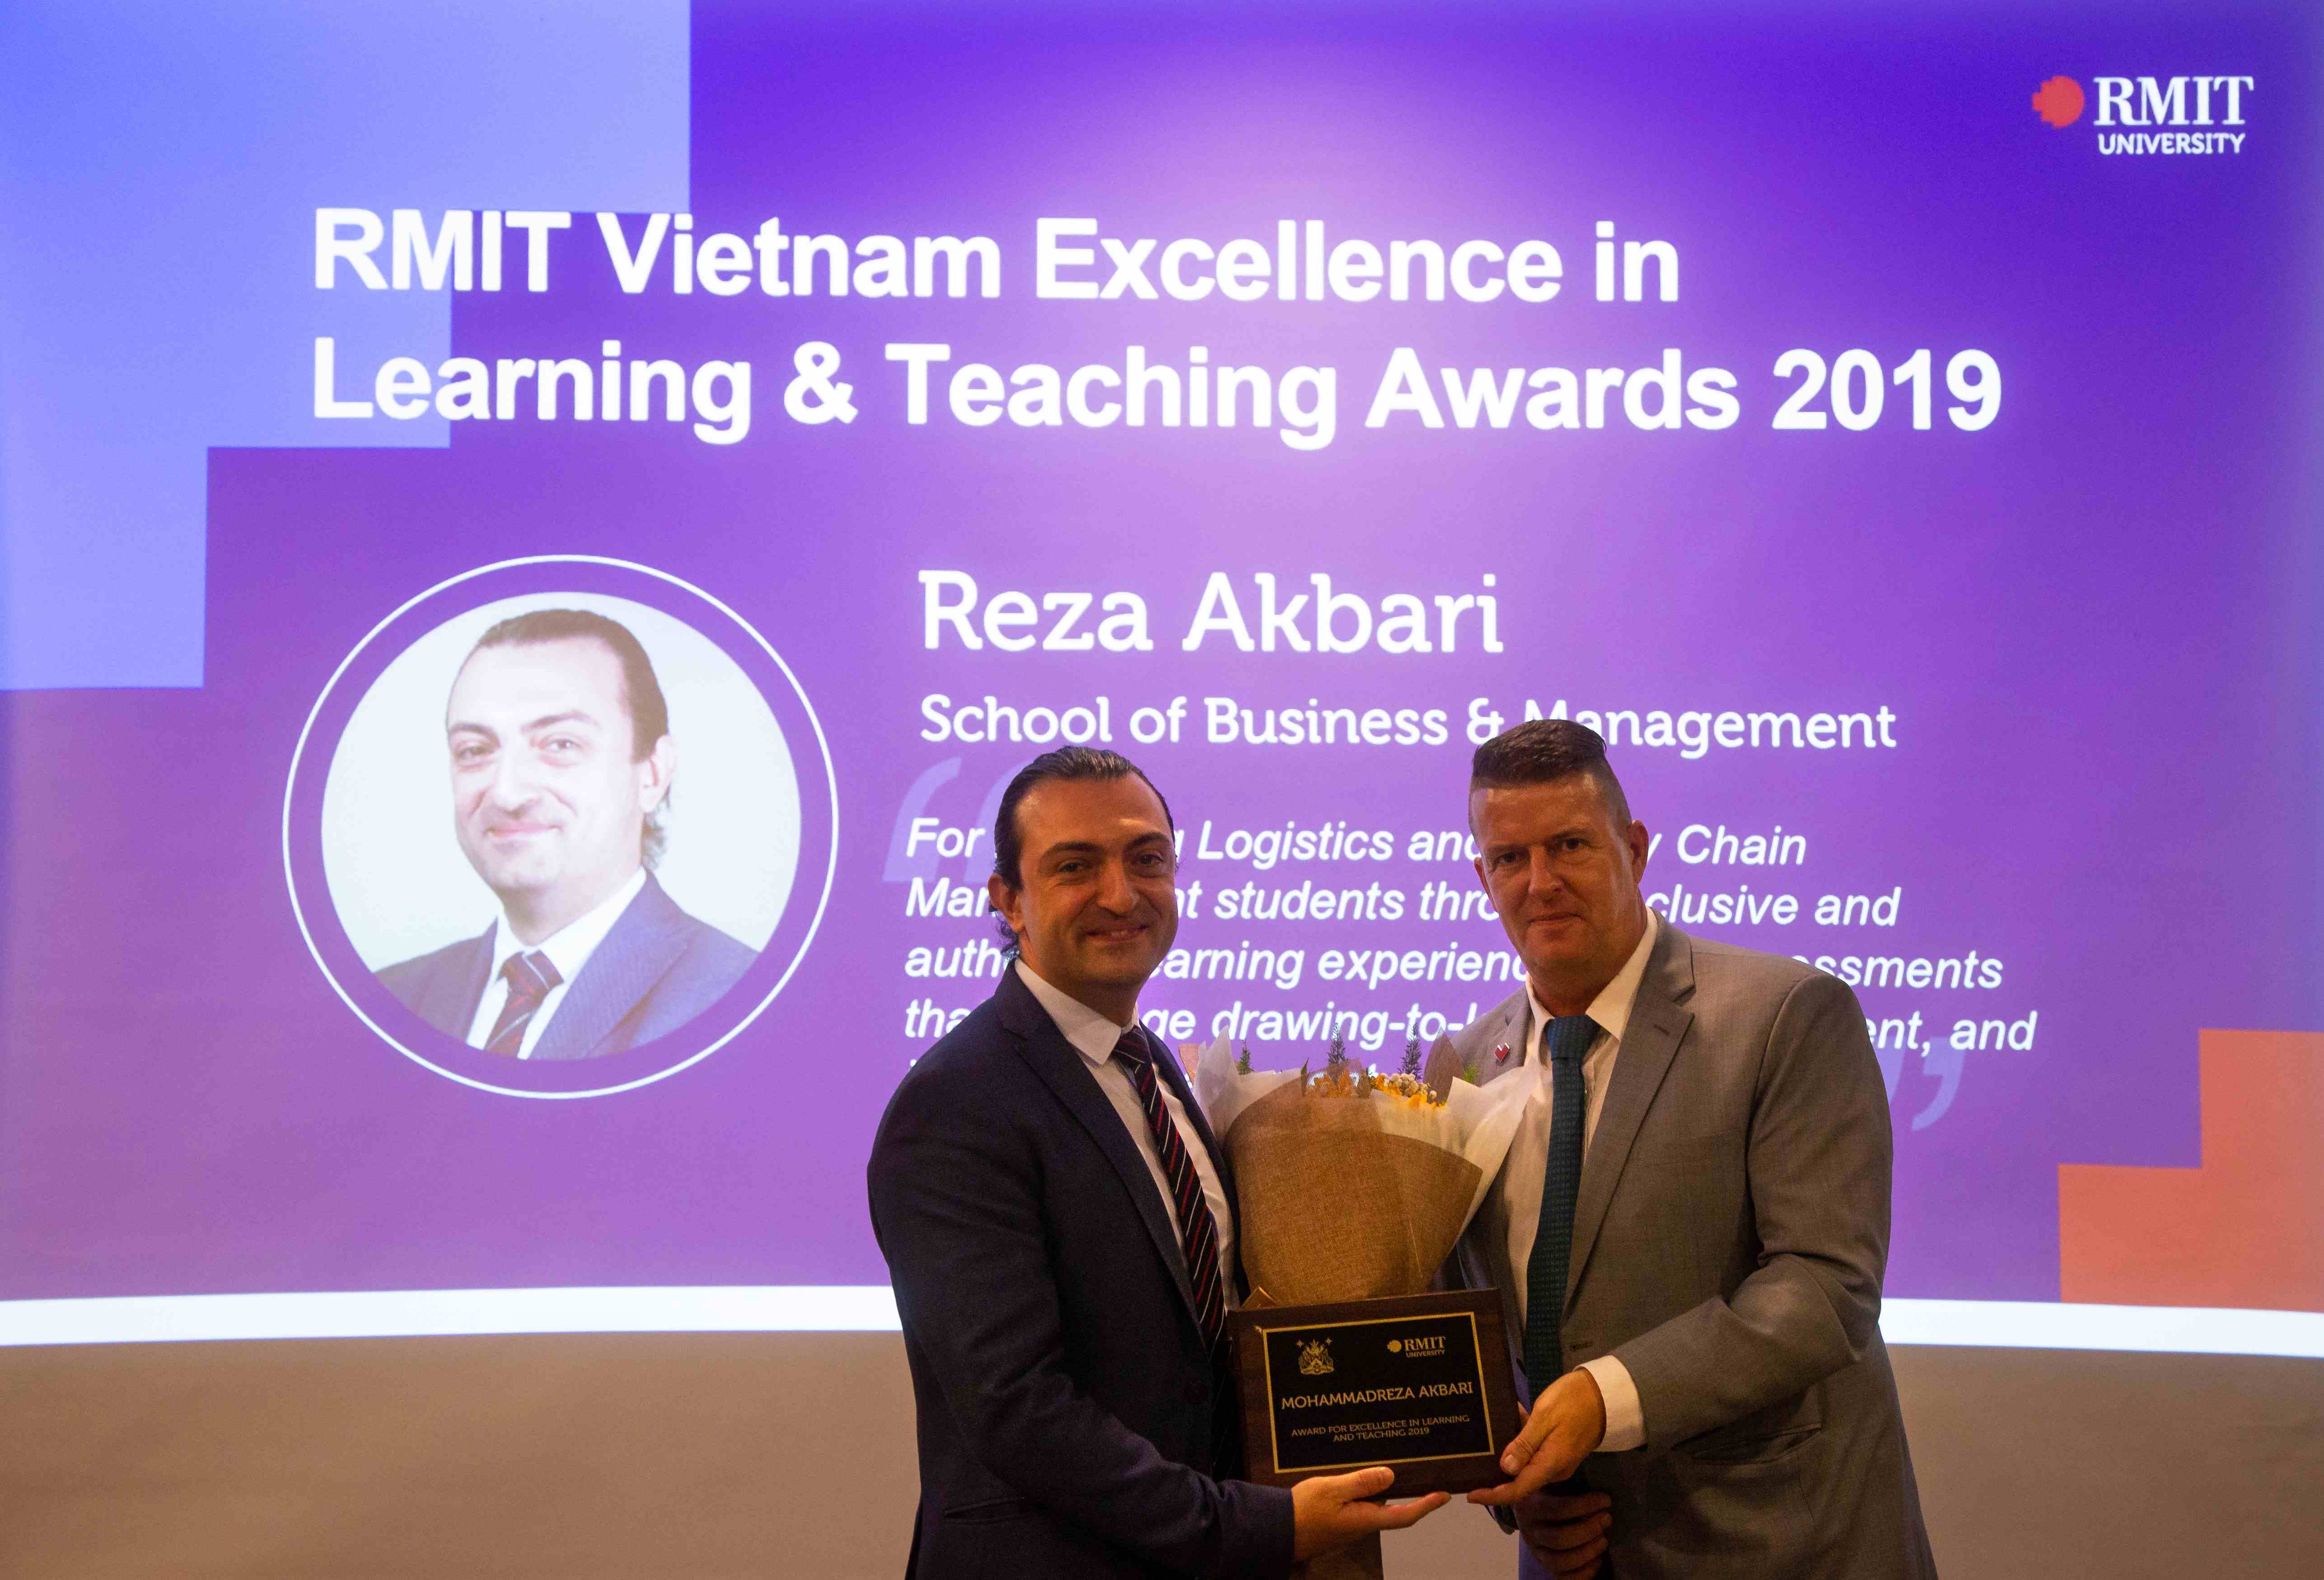 Acting Discipline Lead of Logistics & Supply Chain Management Dr Reza Akbari from the School of Business & Management was presented the Outstanding Contributions to Student Learning award for his commitment to providing students with authentic, industry relevant experiences and assessments. 